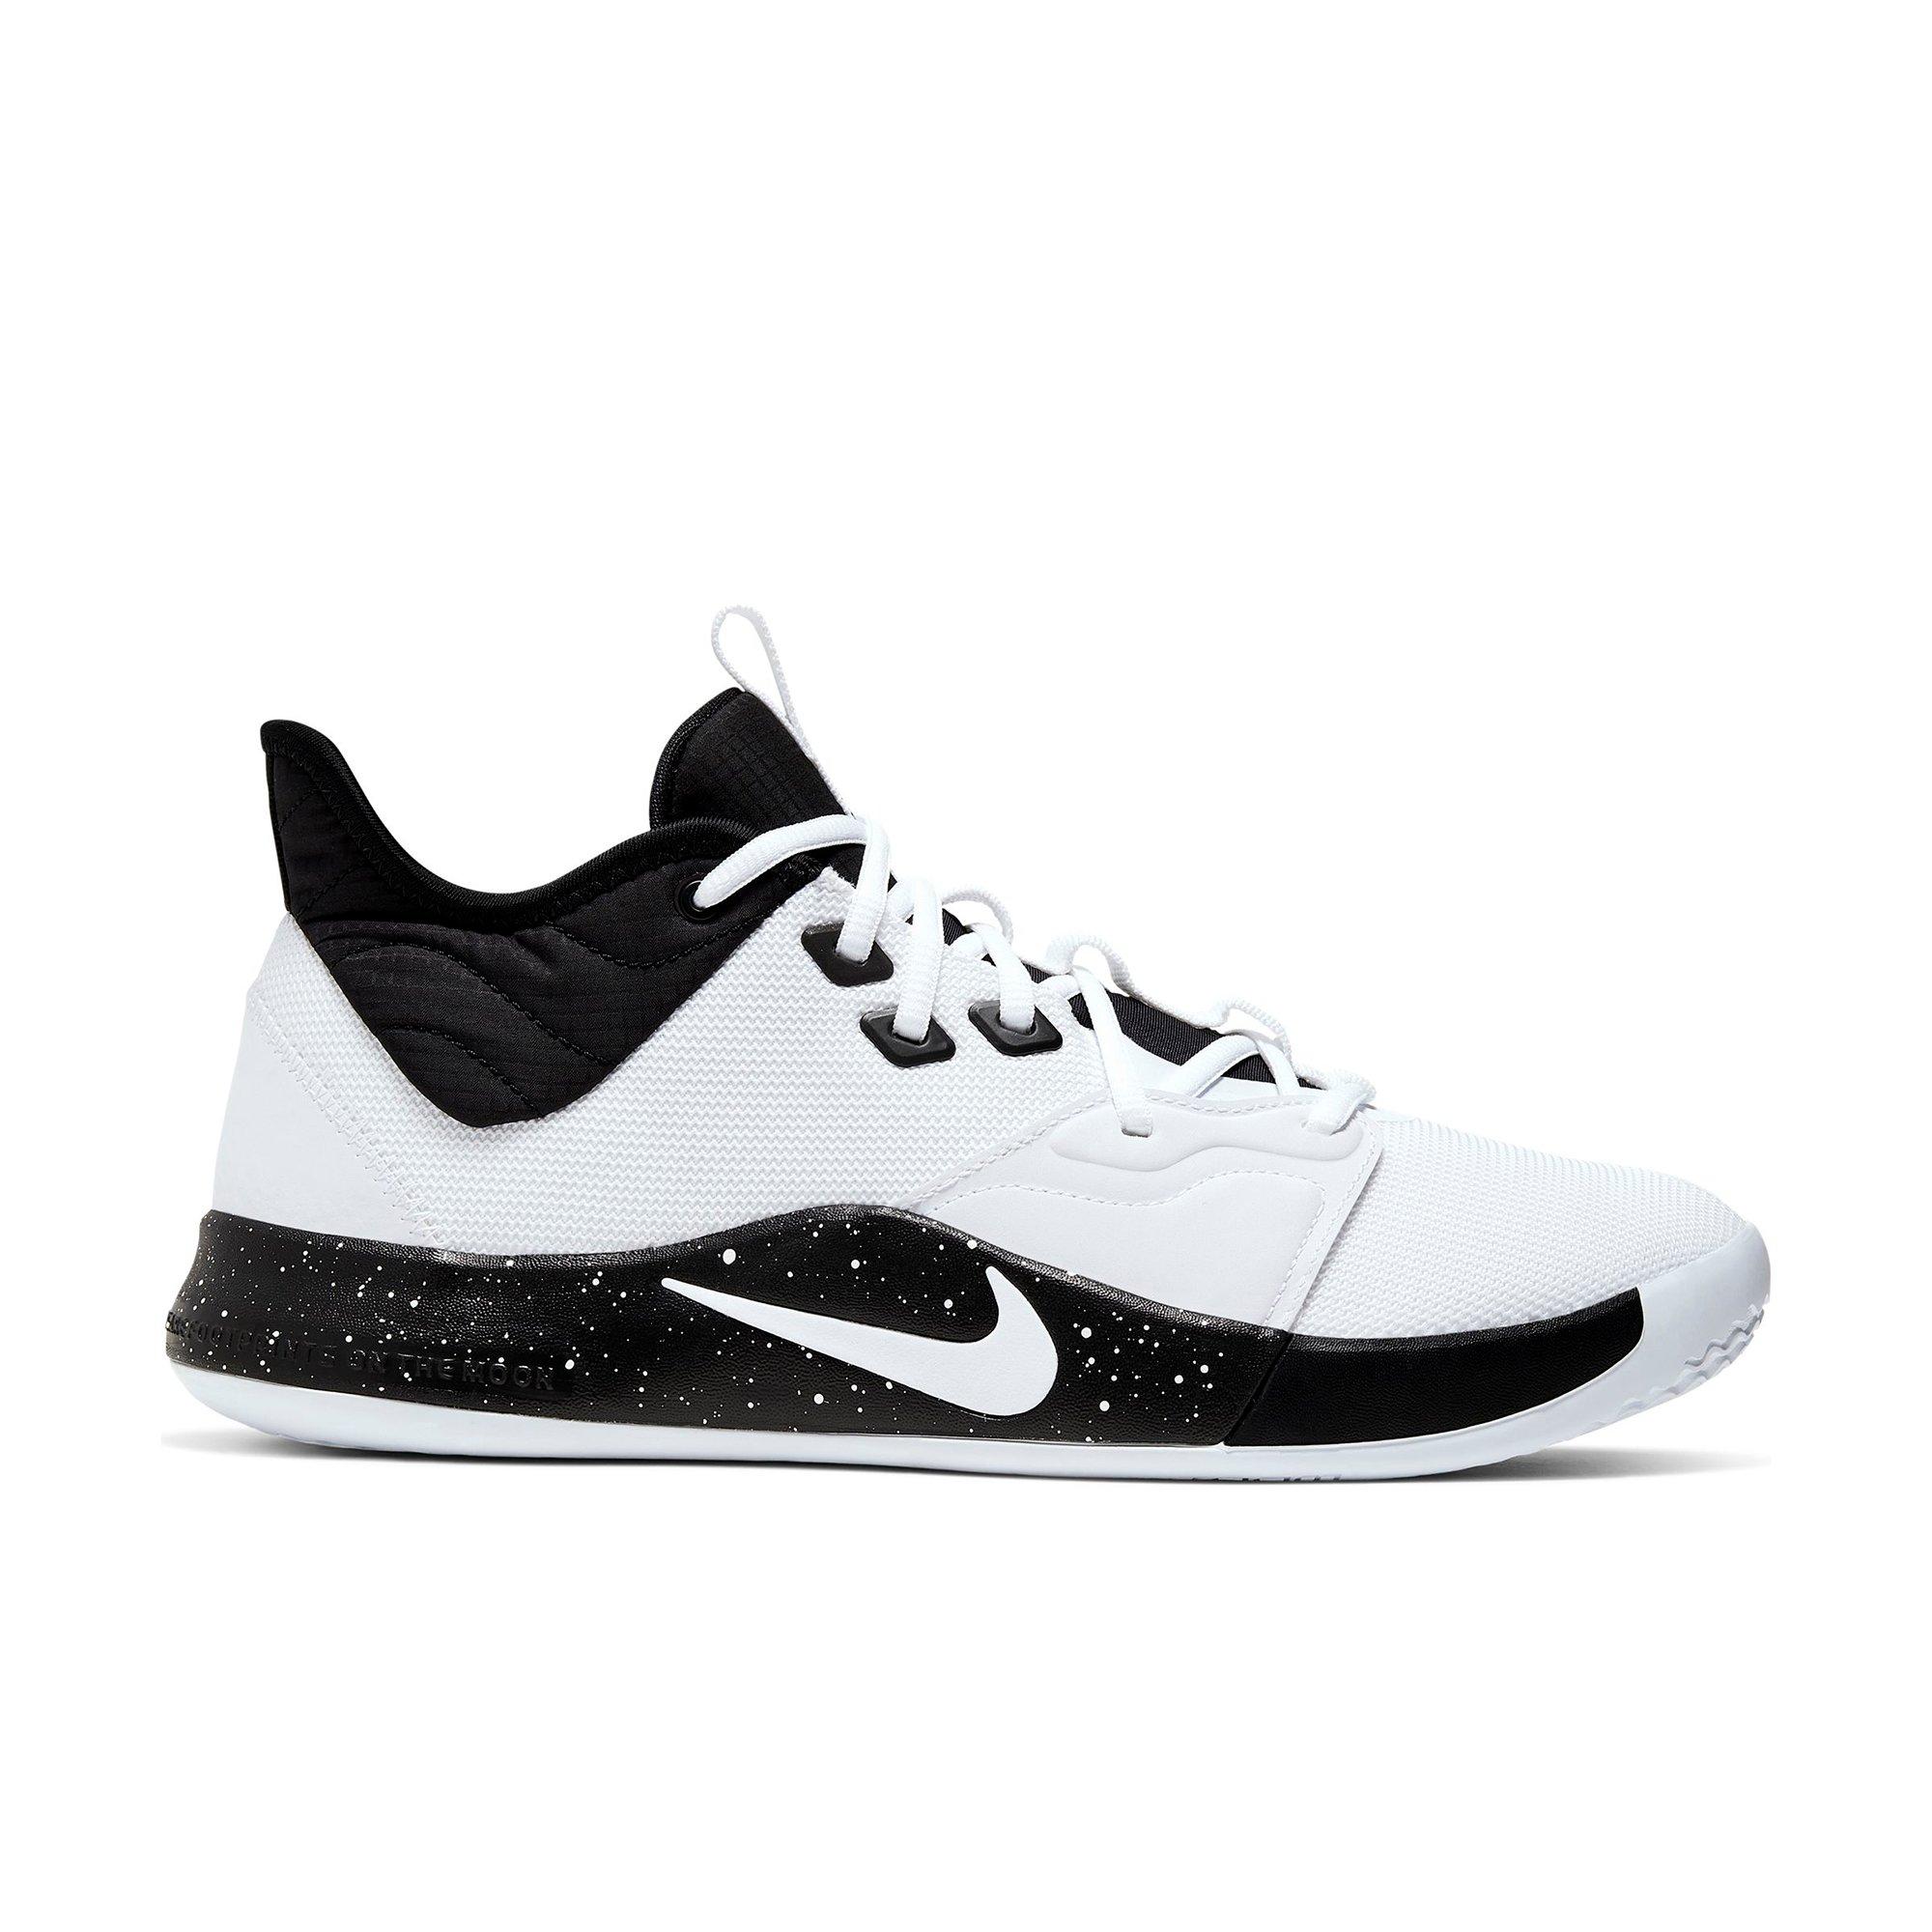 mens black and white basketball shoes